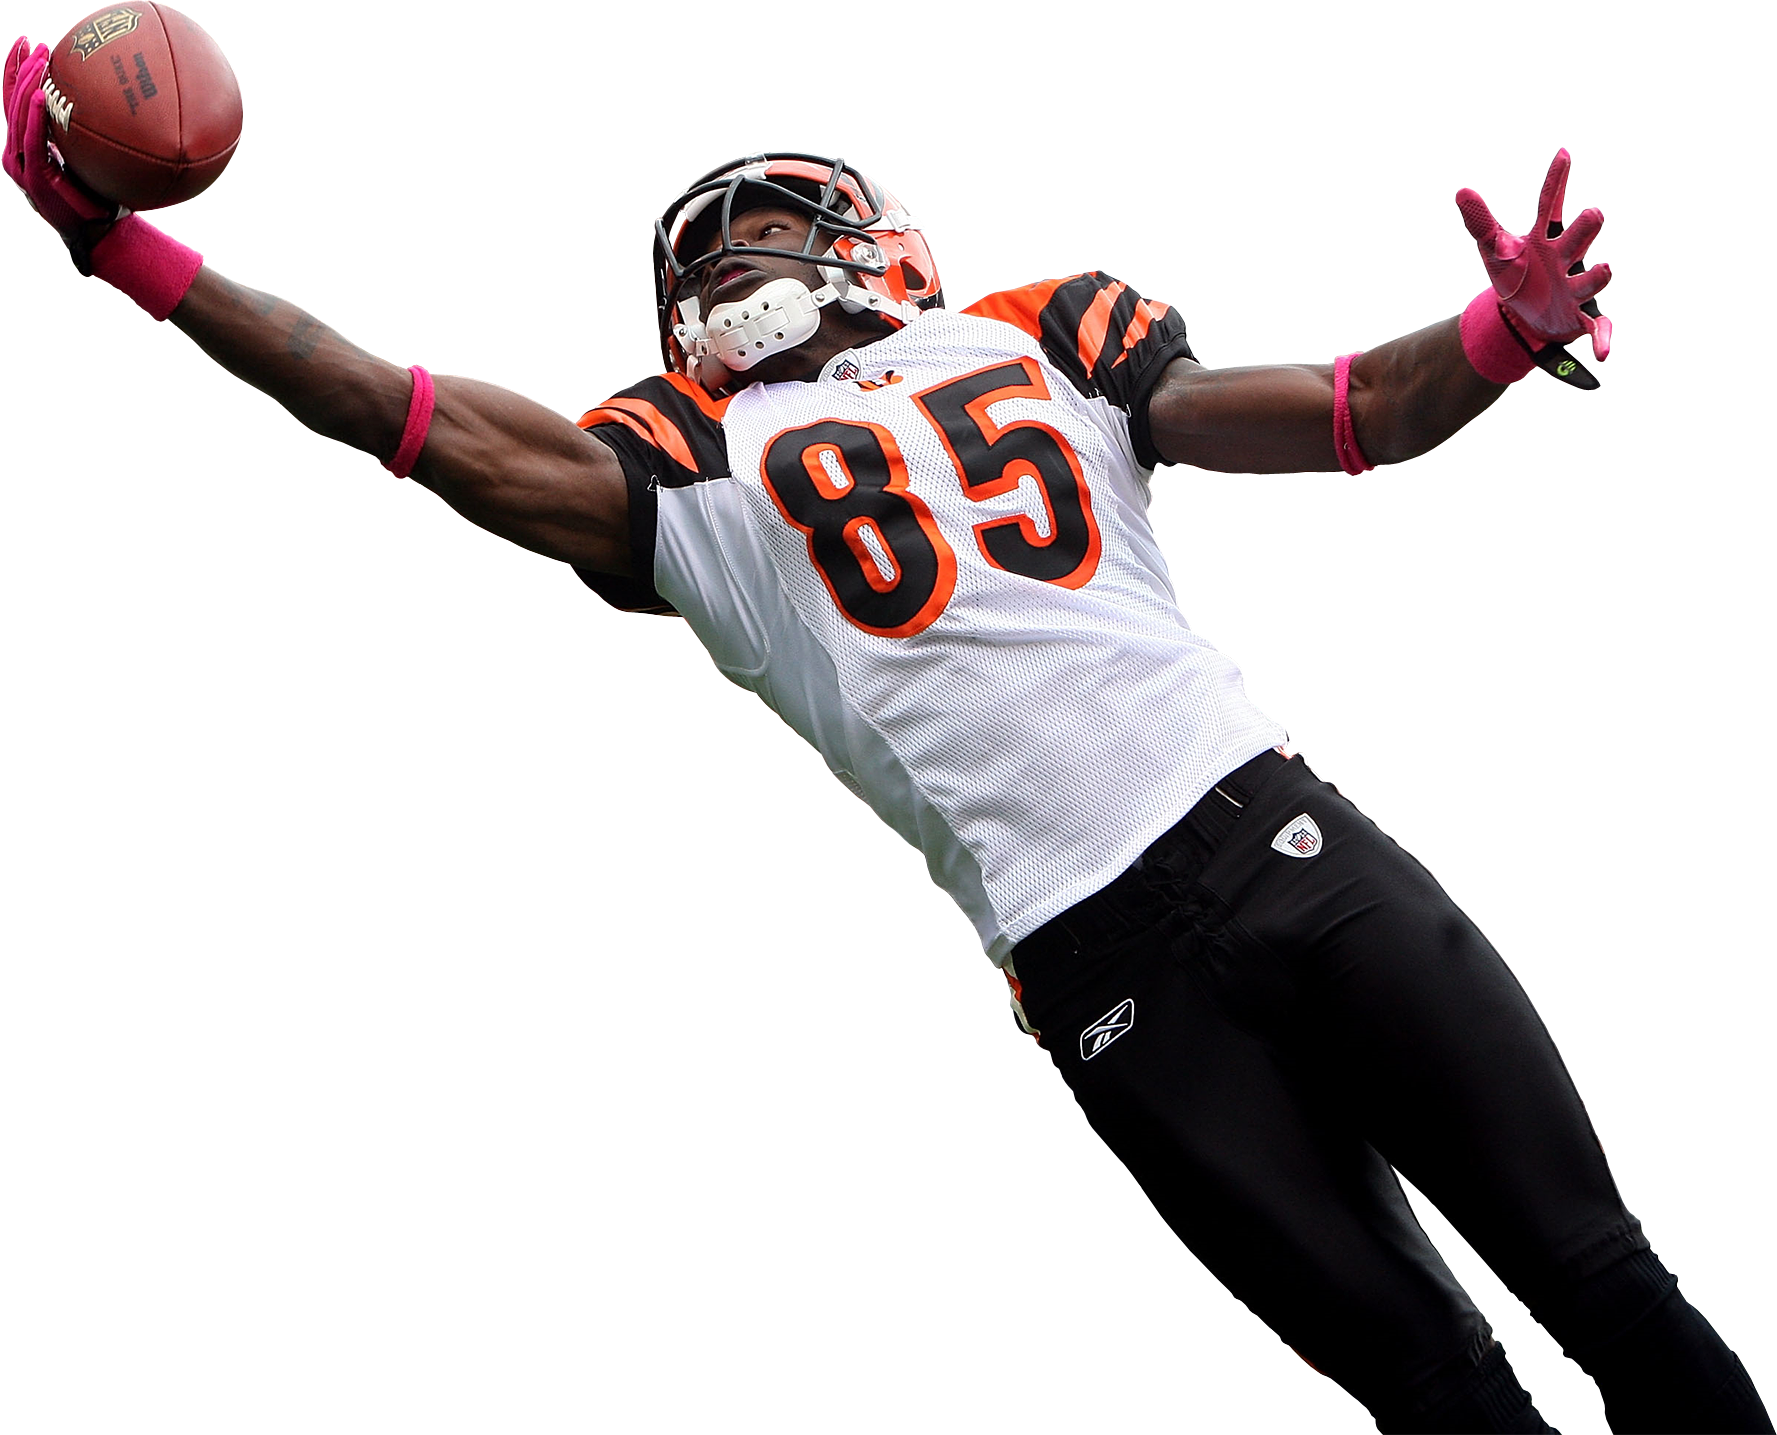 Download American Football Player Catching A Ball PNG Image for Free